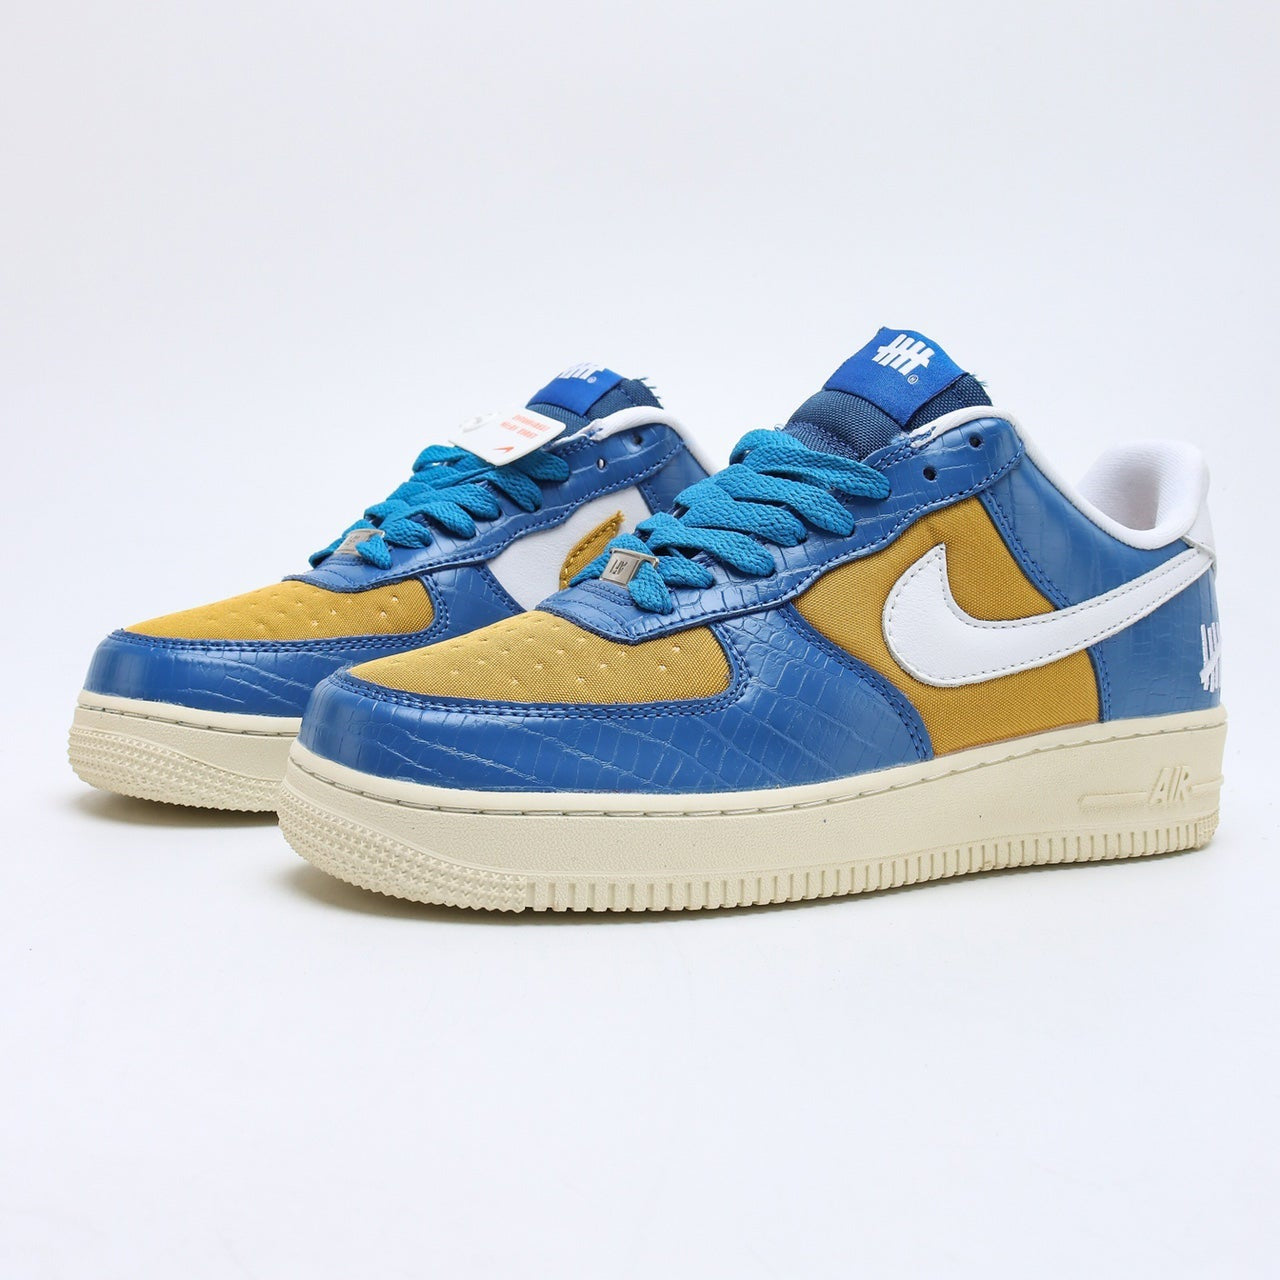 Nike Air Force 1 Low Blue Sneakers Shoes from